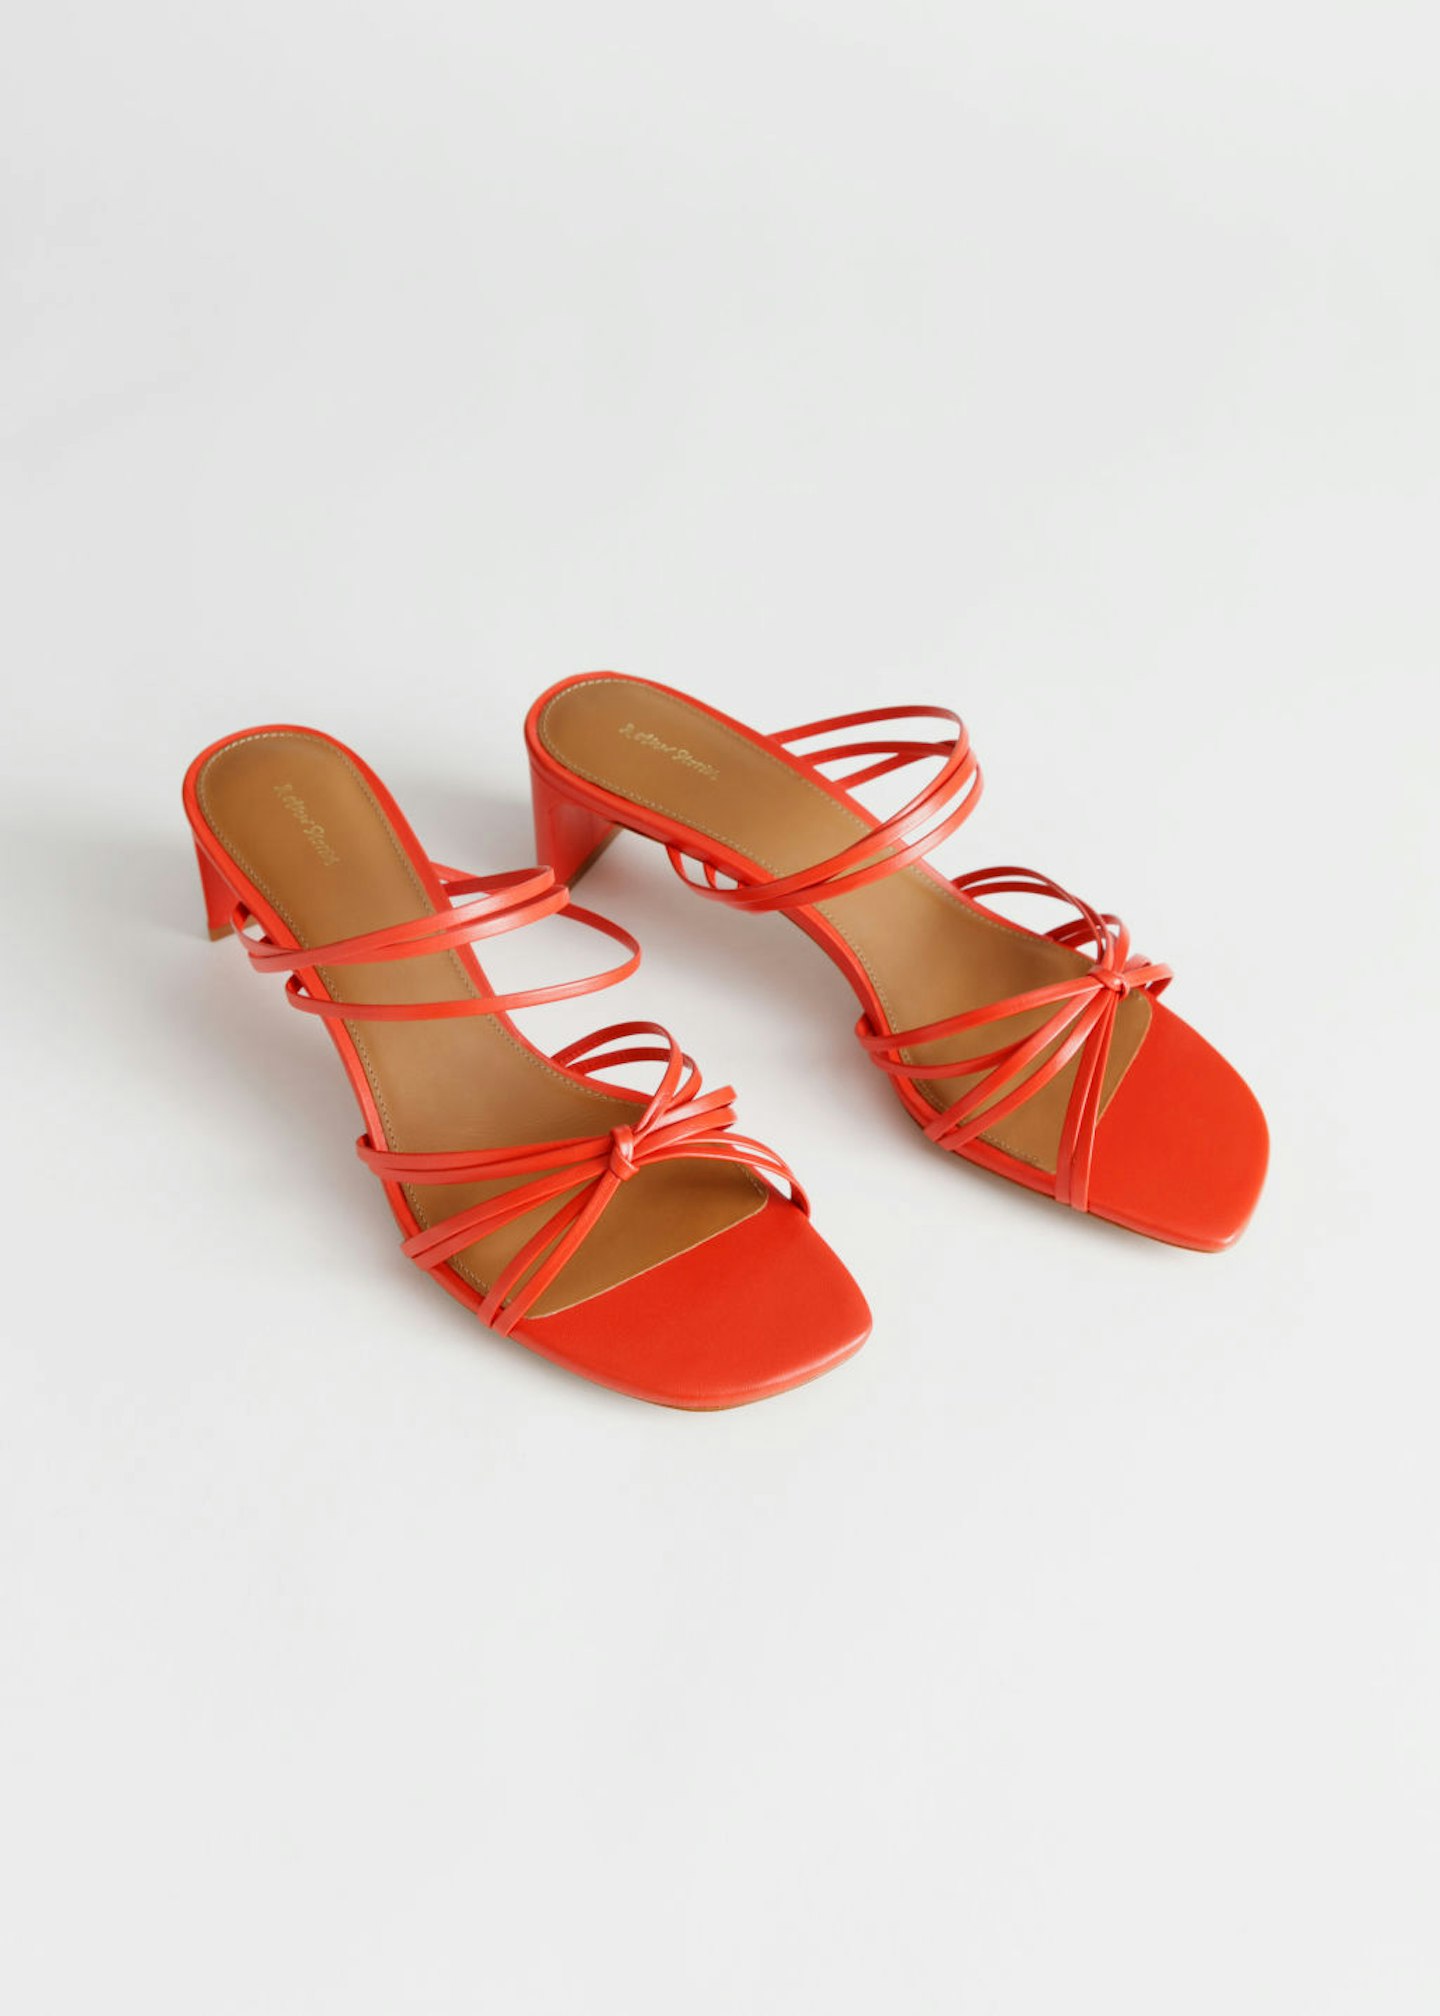 & Other Stories, Strappy Knotted Heeled Sandals, £79